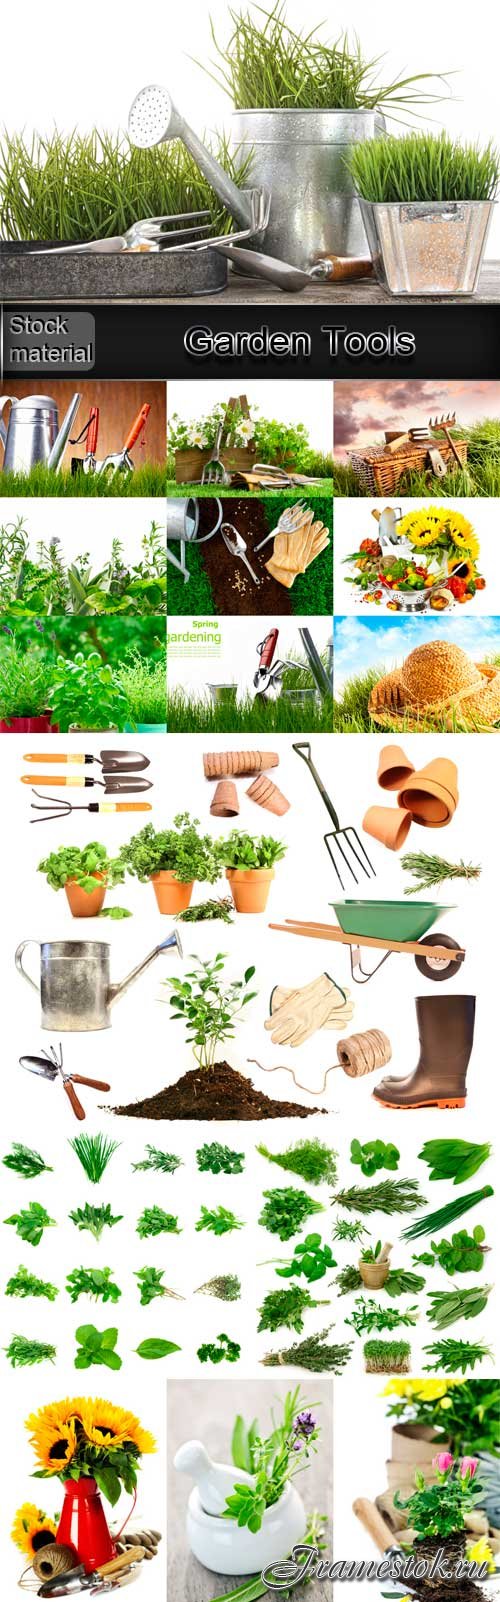 Vegetables, Flowers and Garden Tools